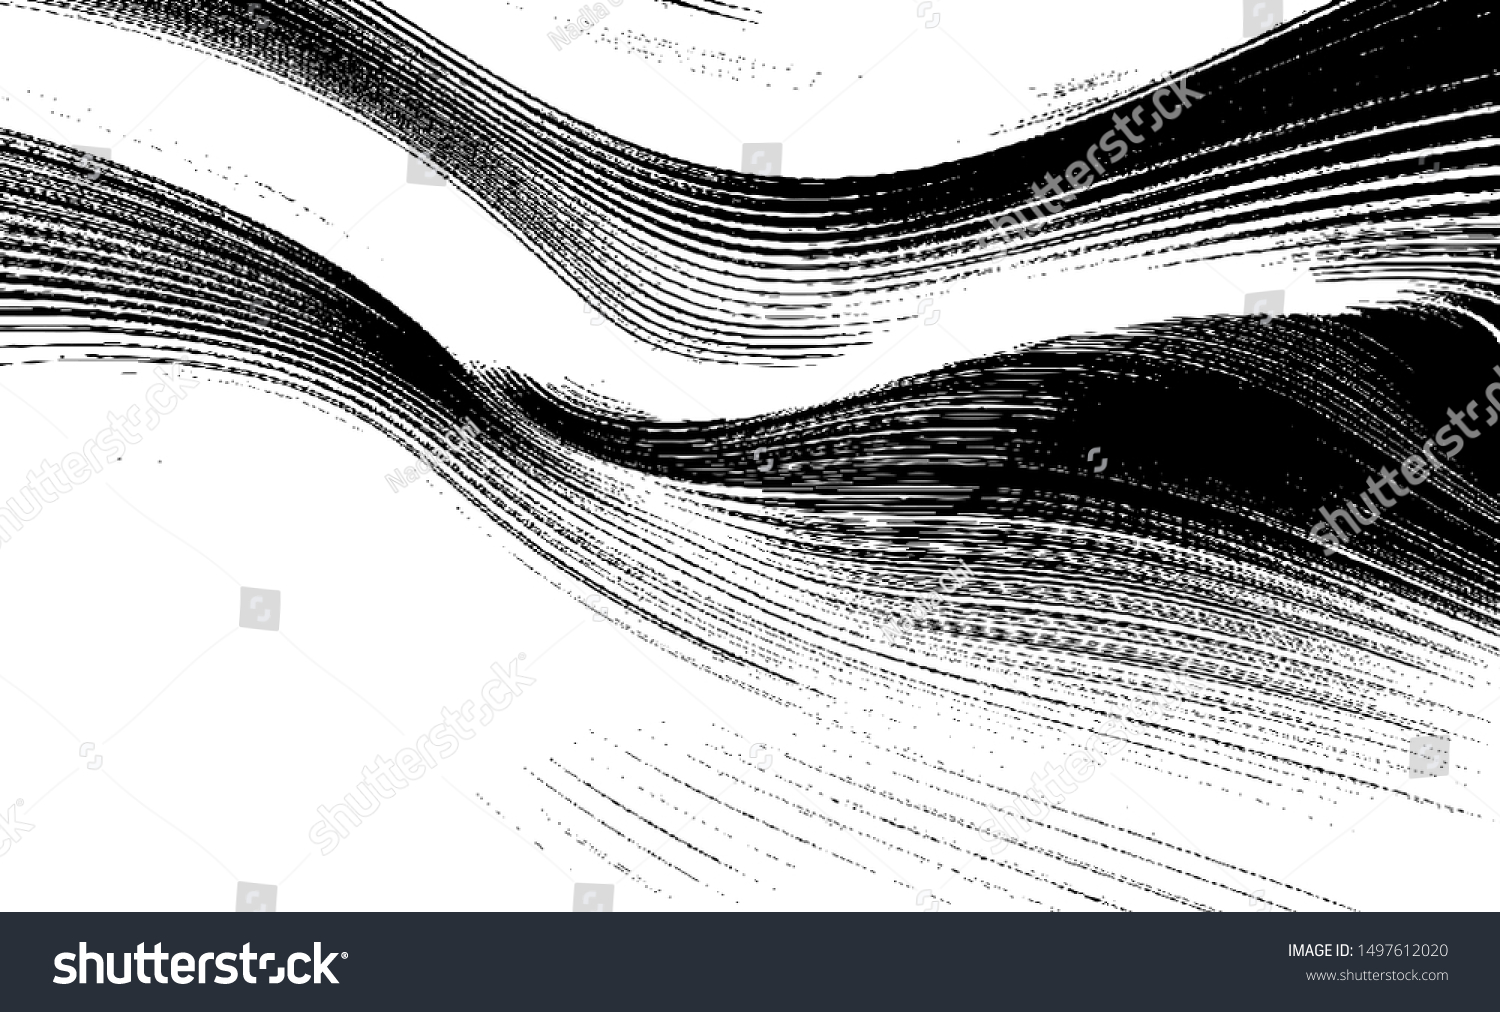 Swirled and curled stripes and brush strokes texture. Marble or acrylic atrwork imitation. Cool and swirly background. Abstract vector illustration. Black isolated on white. EPS10  #1497612020